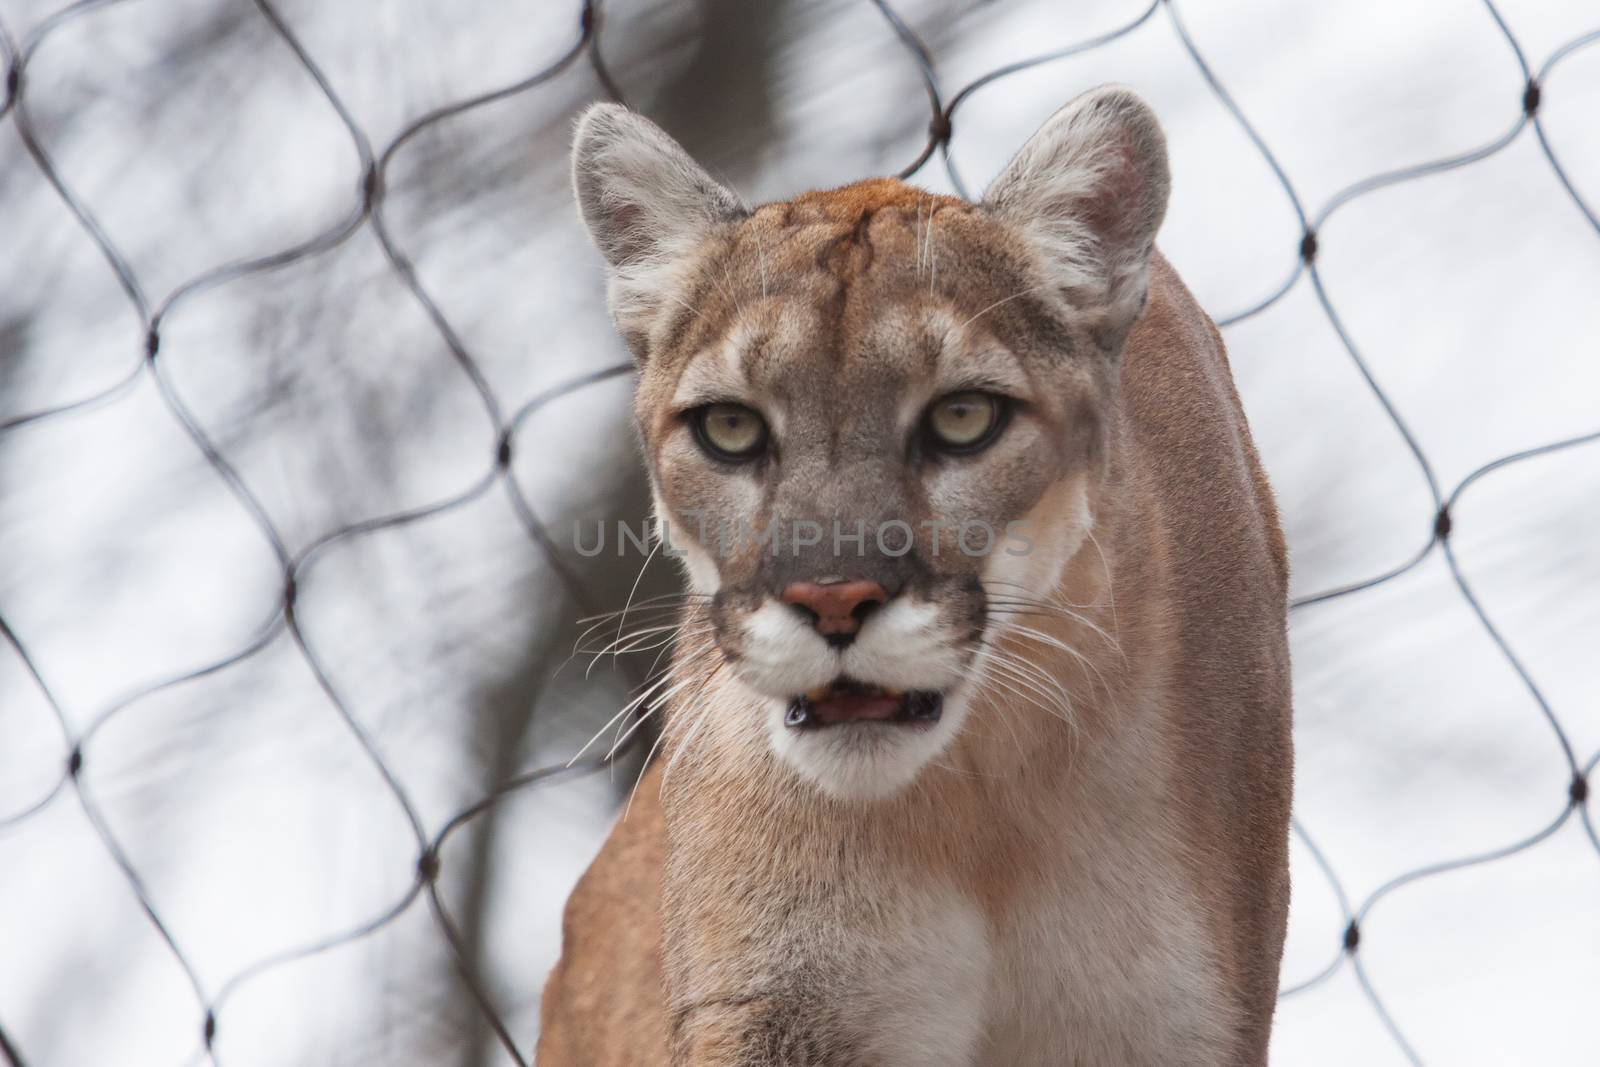 Mountain Lion- Puma - Cougar close up with fence.